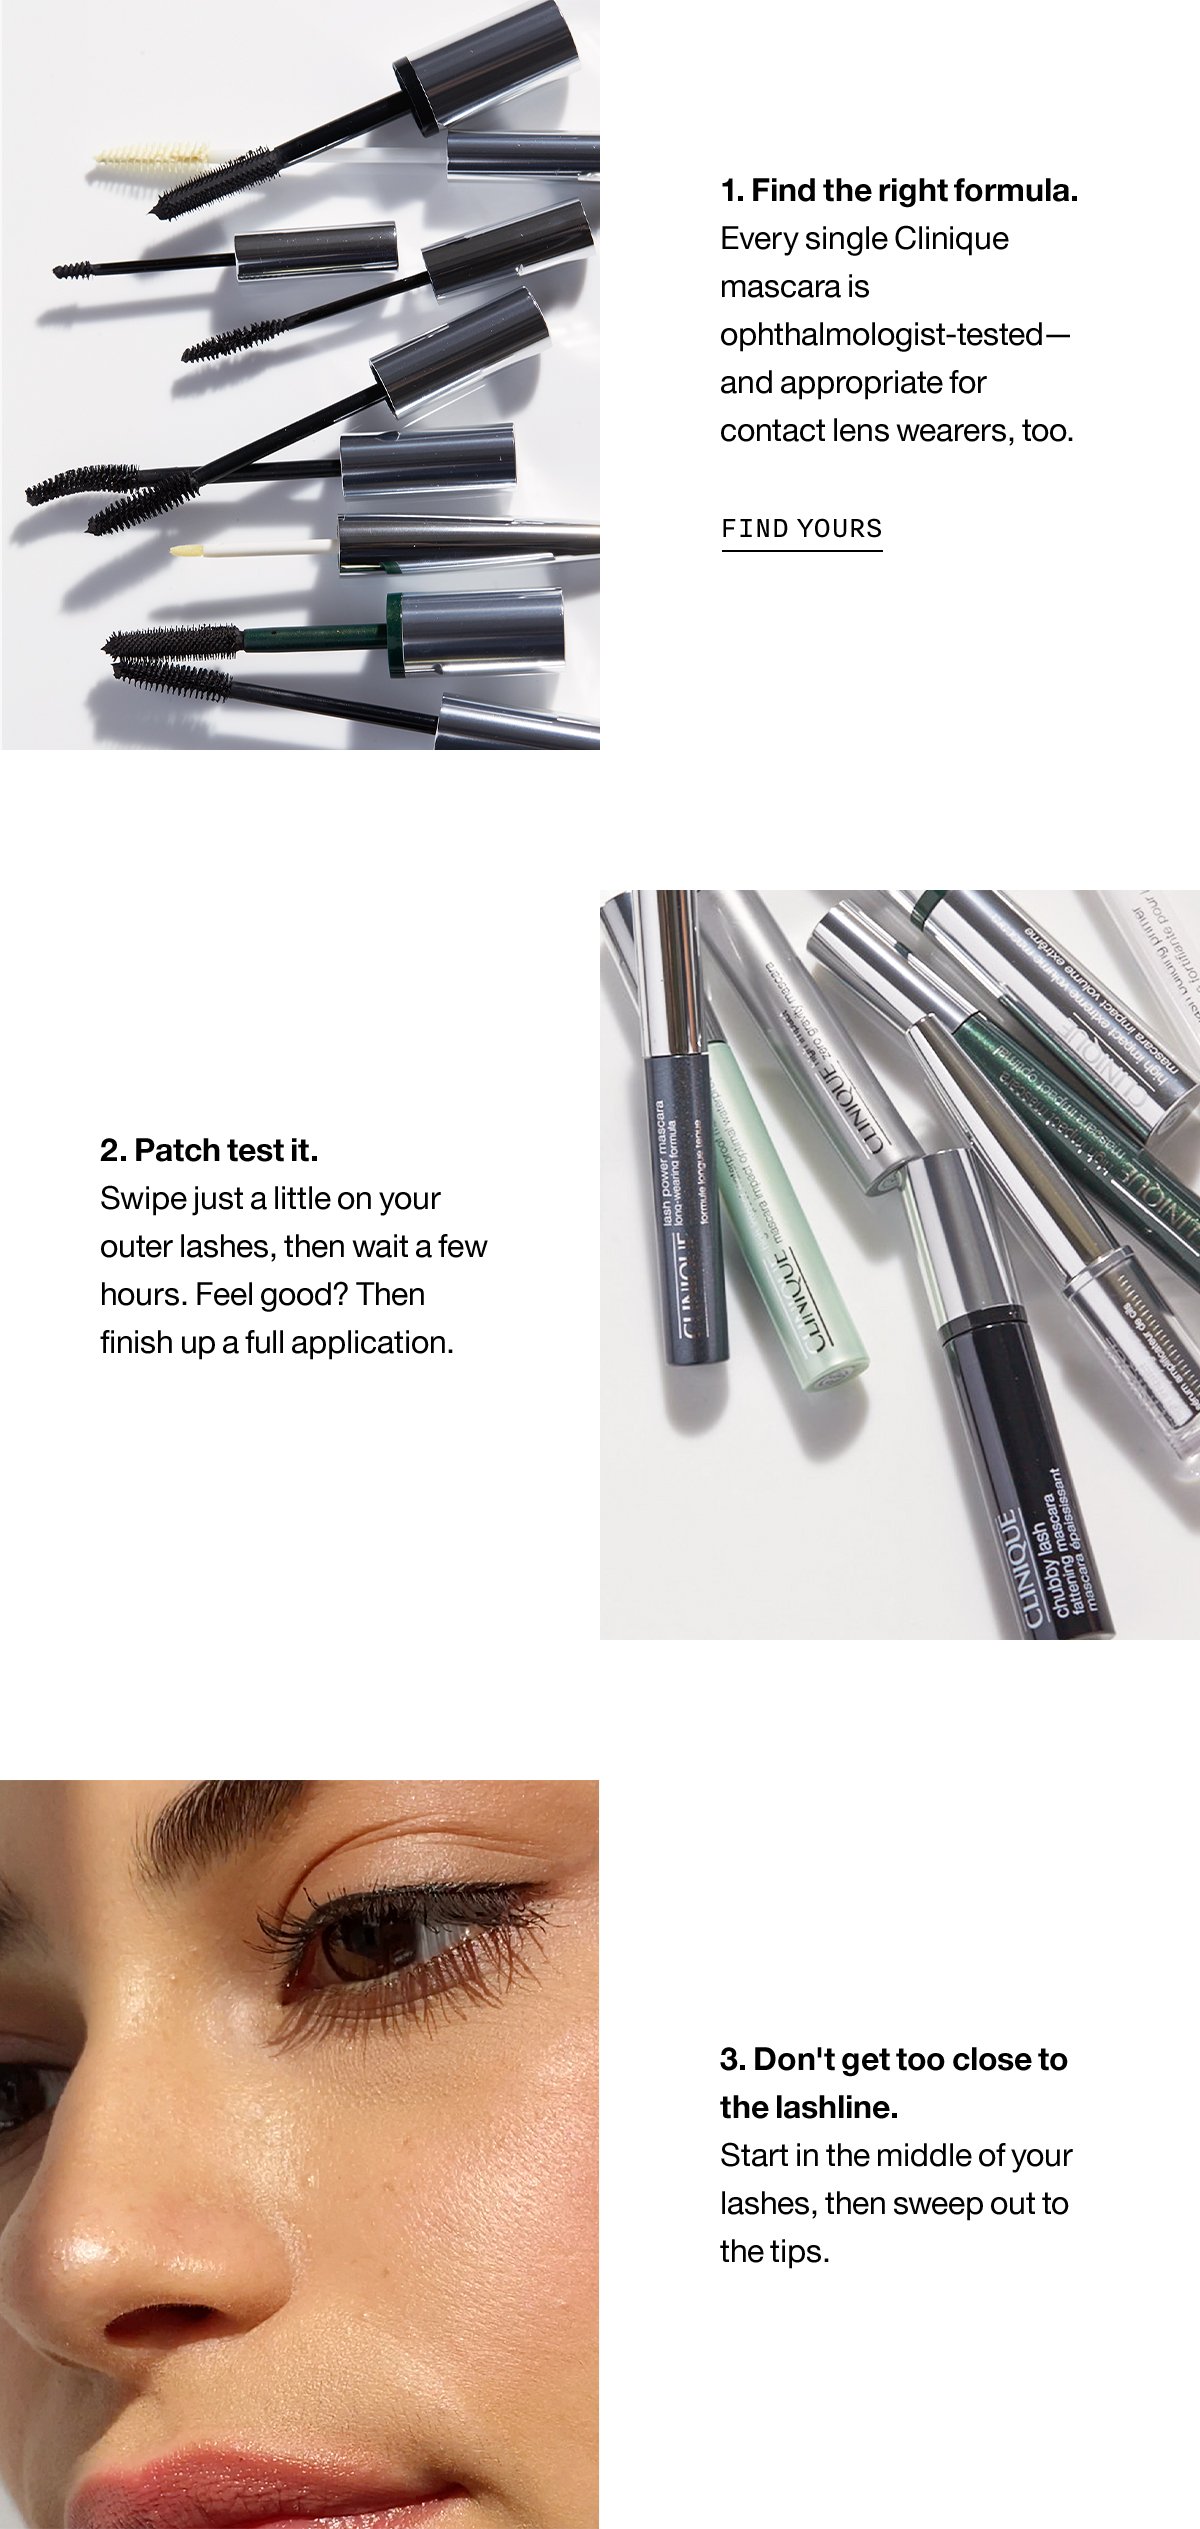 1. Find the right formula. Every single Clinique mascara is ophthalmologist-tested - and appropriated for contact lens wears, too. FIND YOURS | 2. Patch test it. Swipe just a little on your outer lashes, then wait a few hours. Feel good? Then finish up a full aplication. | 3. Don't get too close to the lashline. Start in the middle of your lashes, then sweep out to the tips.